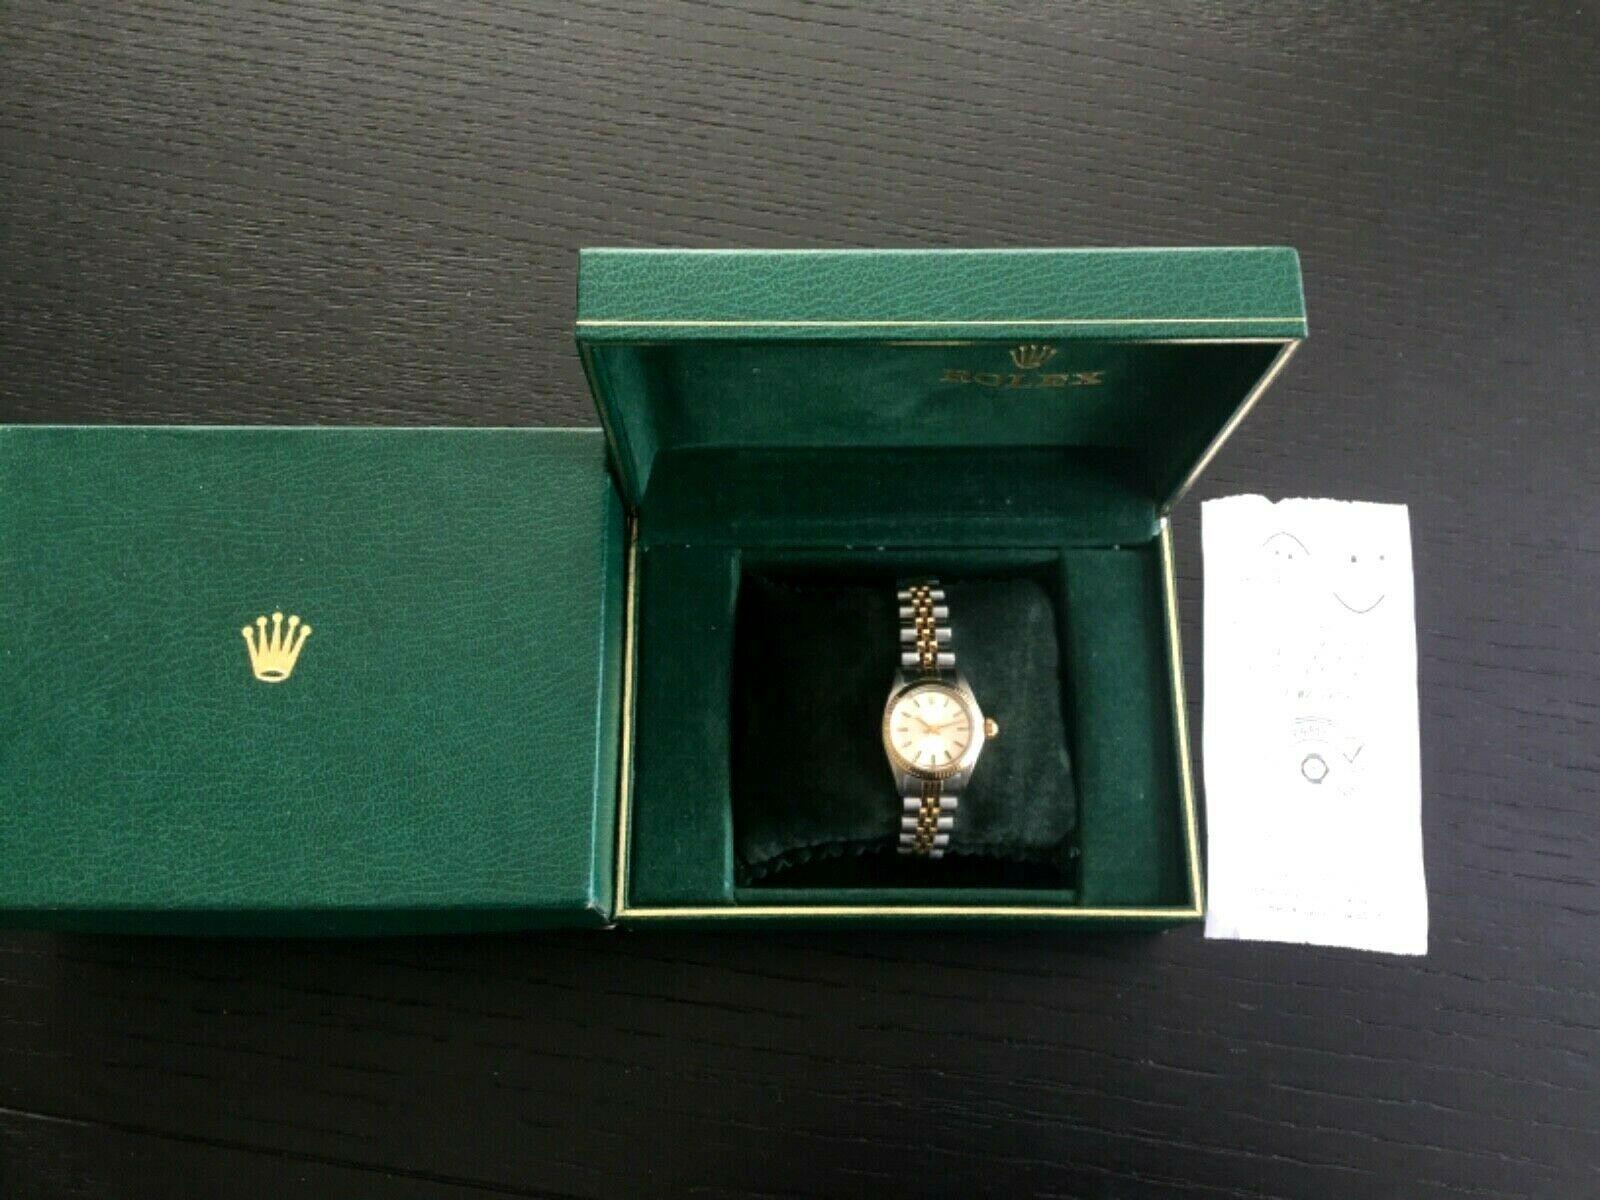 You are viewing a beautiful Ladies Rolex Oyster Perpetual Model 6719 watch set in the most desirable 18k yellow gold and stainless steel configuration.  
This stunning watch just went through a thorough refurbish and overhaul by one of the best